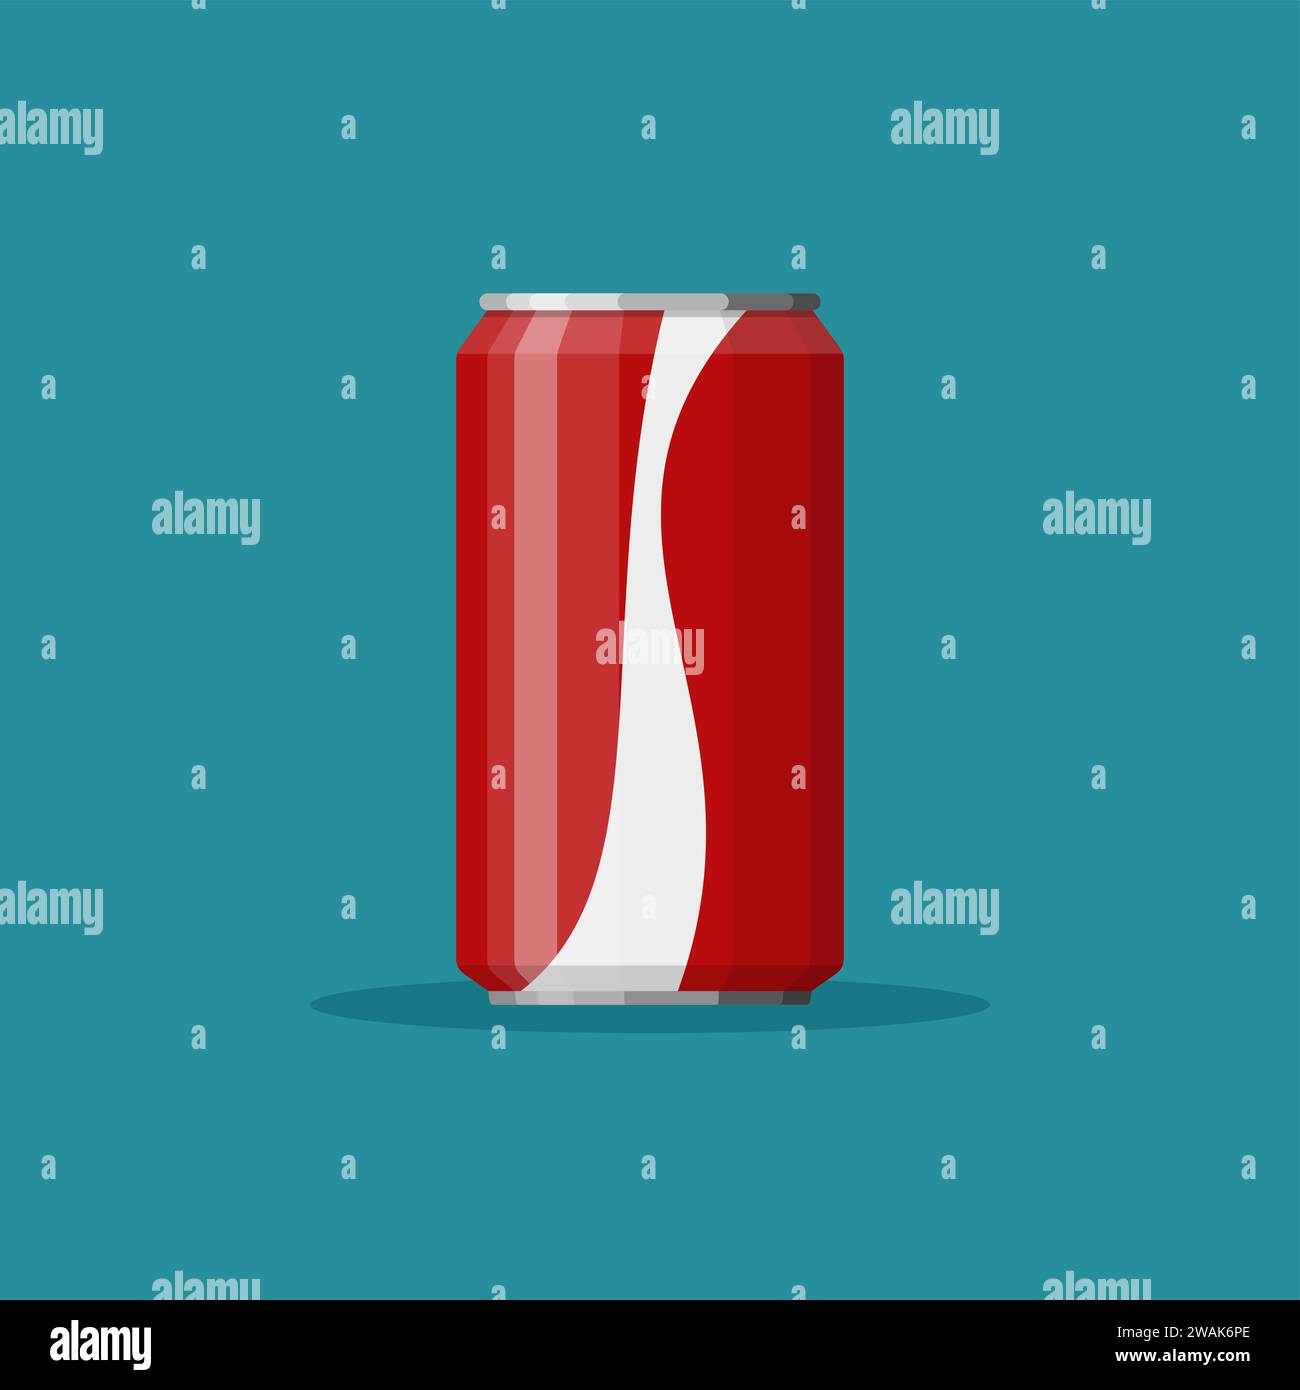 Cola soda in red aluminum can icon on blue background. Soft drink sign. Drink in packaging. Vector illustration. Stock Vector